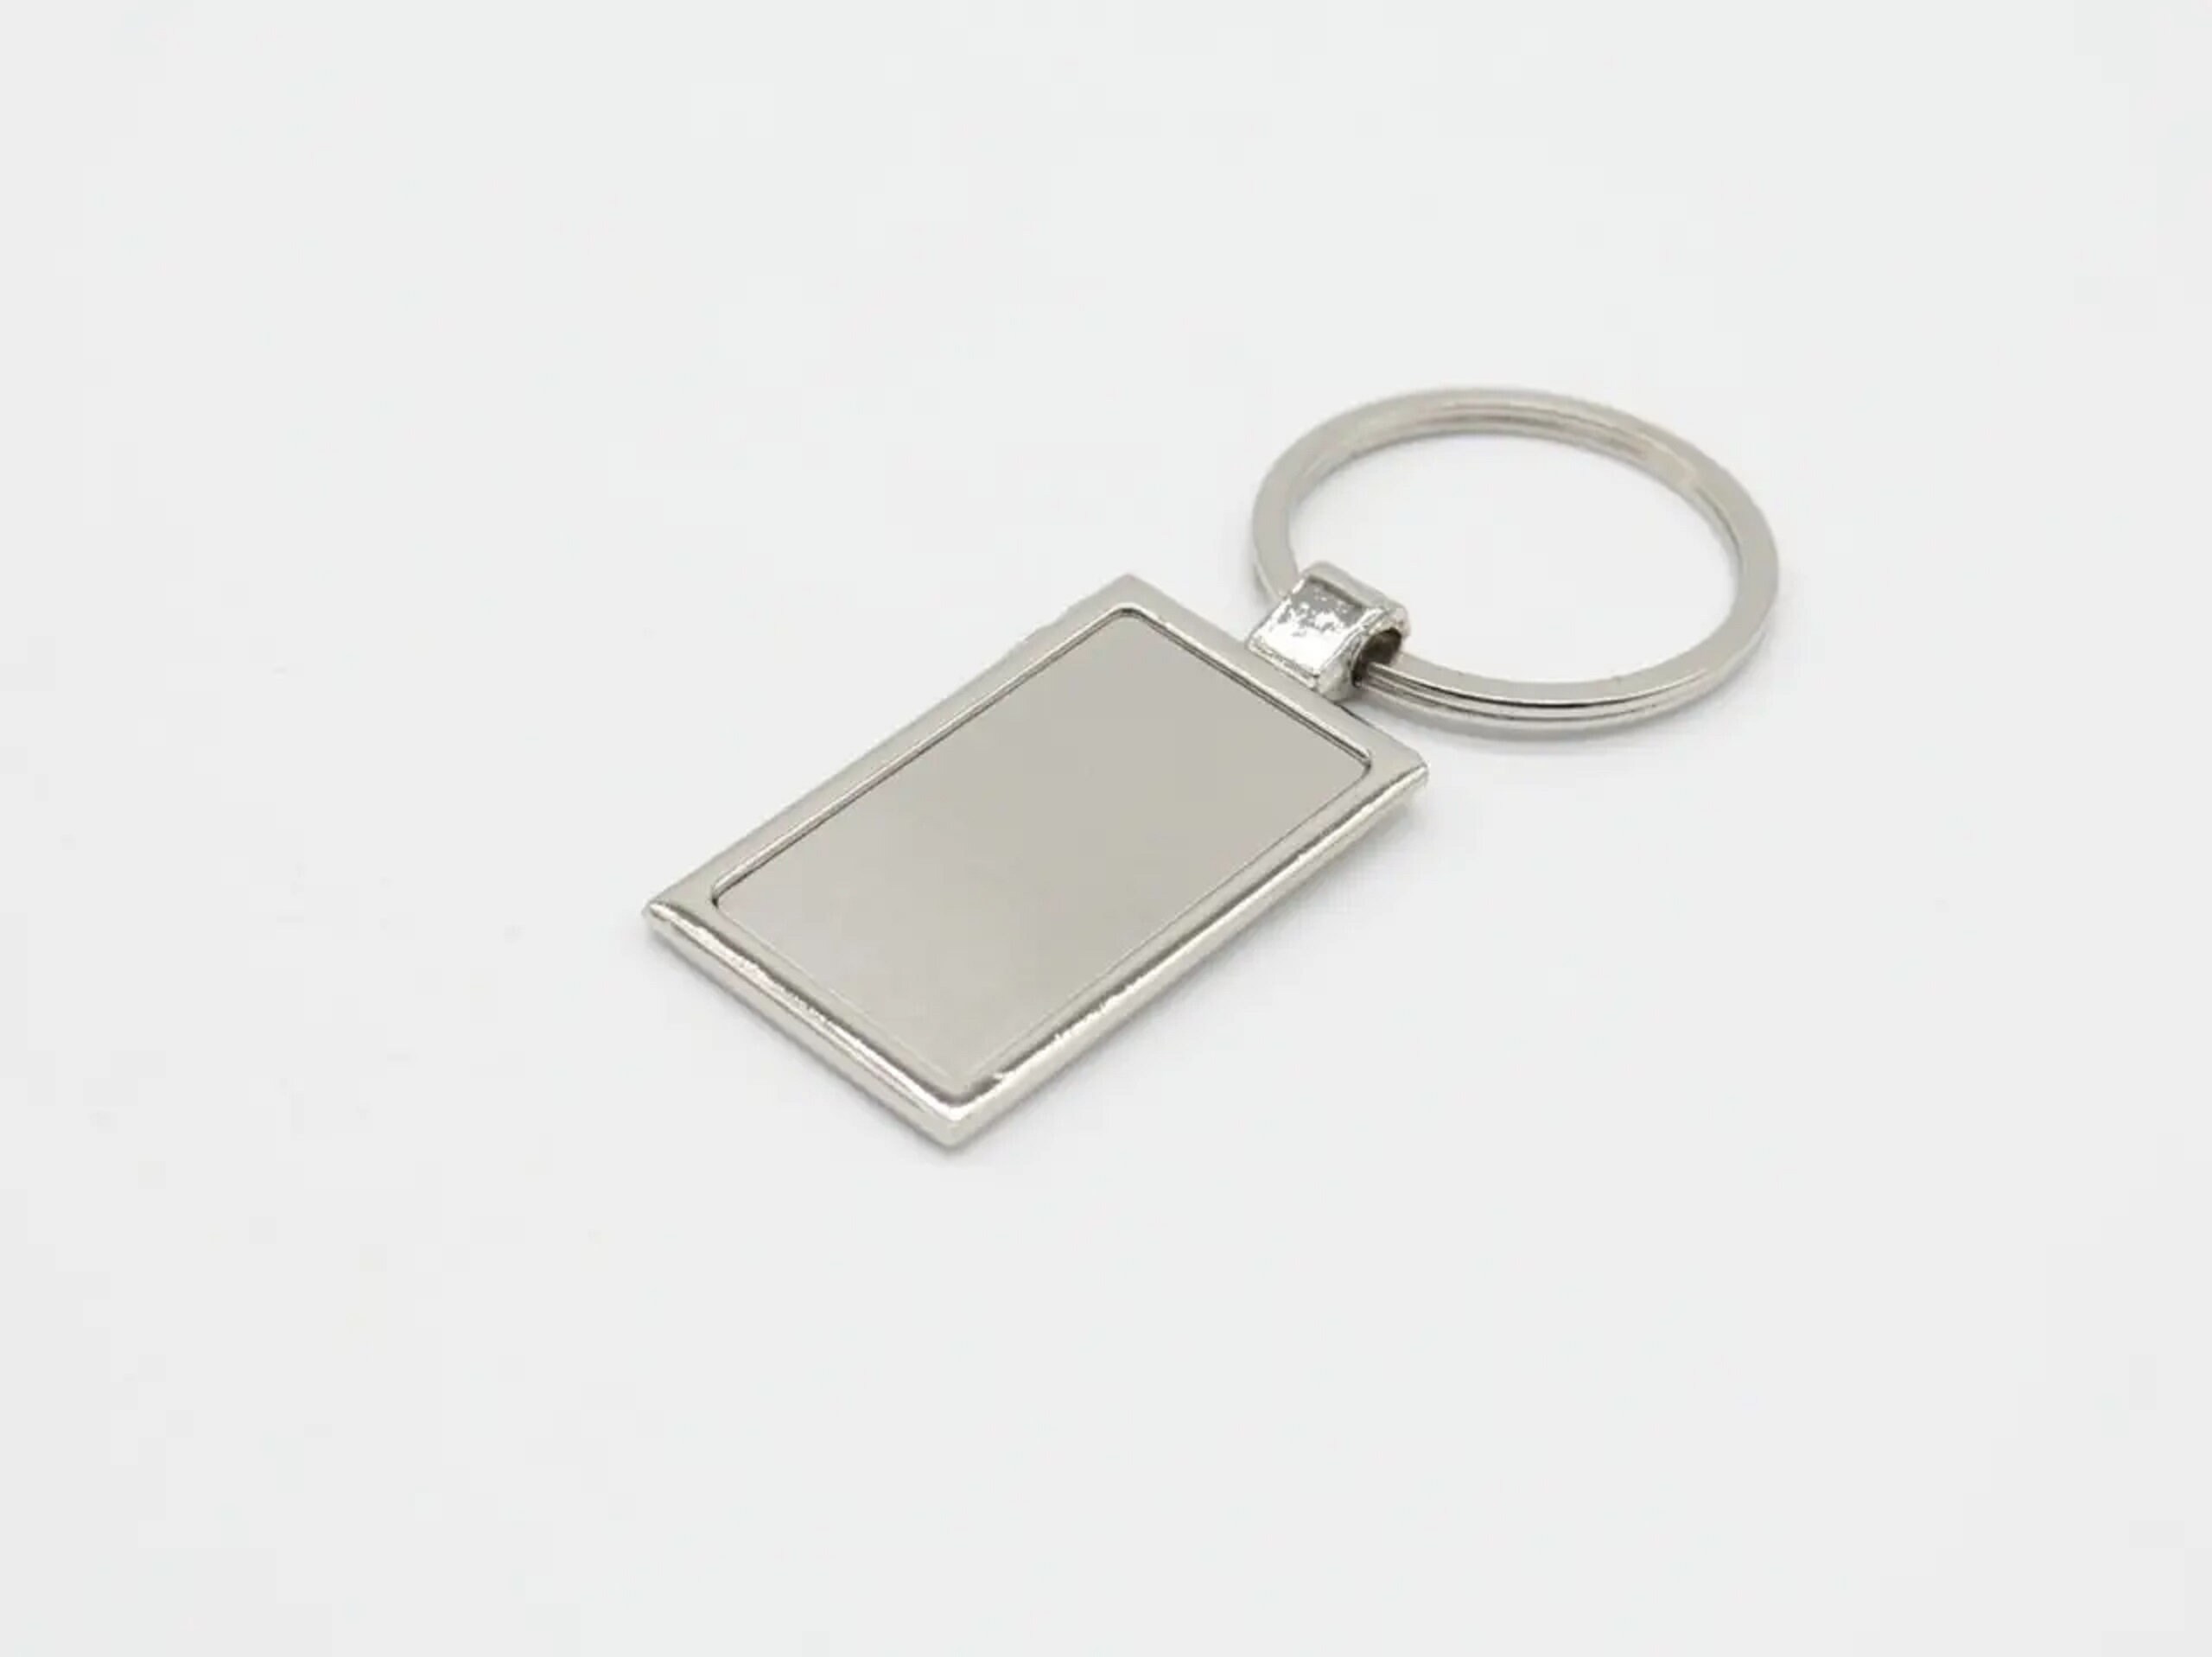 5pcs Blank Silver Keyring, Stainless Steel Square Keychain Supplies, Square  Pendant Ready to Stamp or Engrave as Date Key Chain Wholesale 